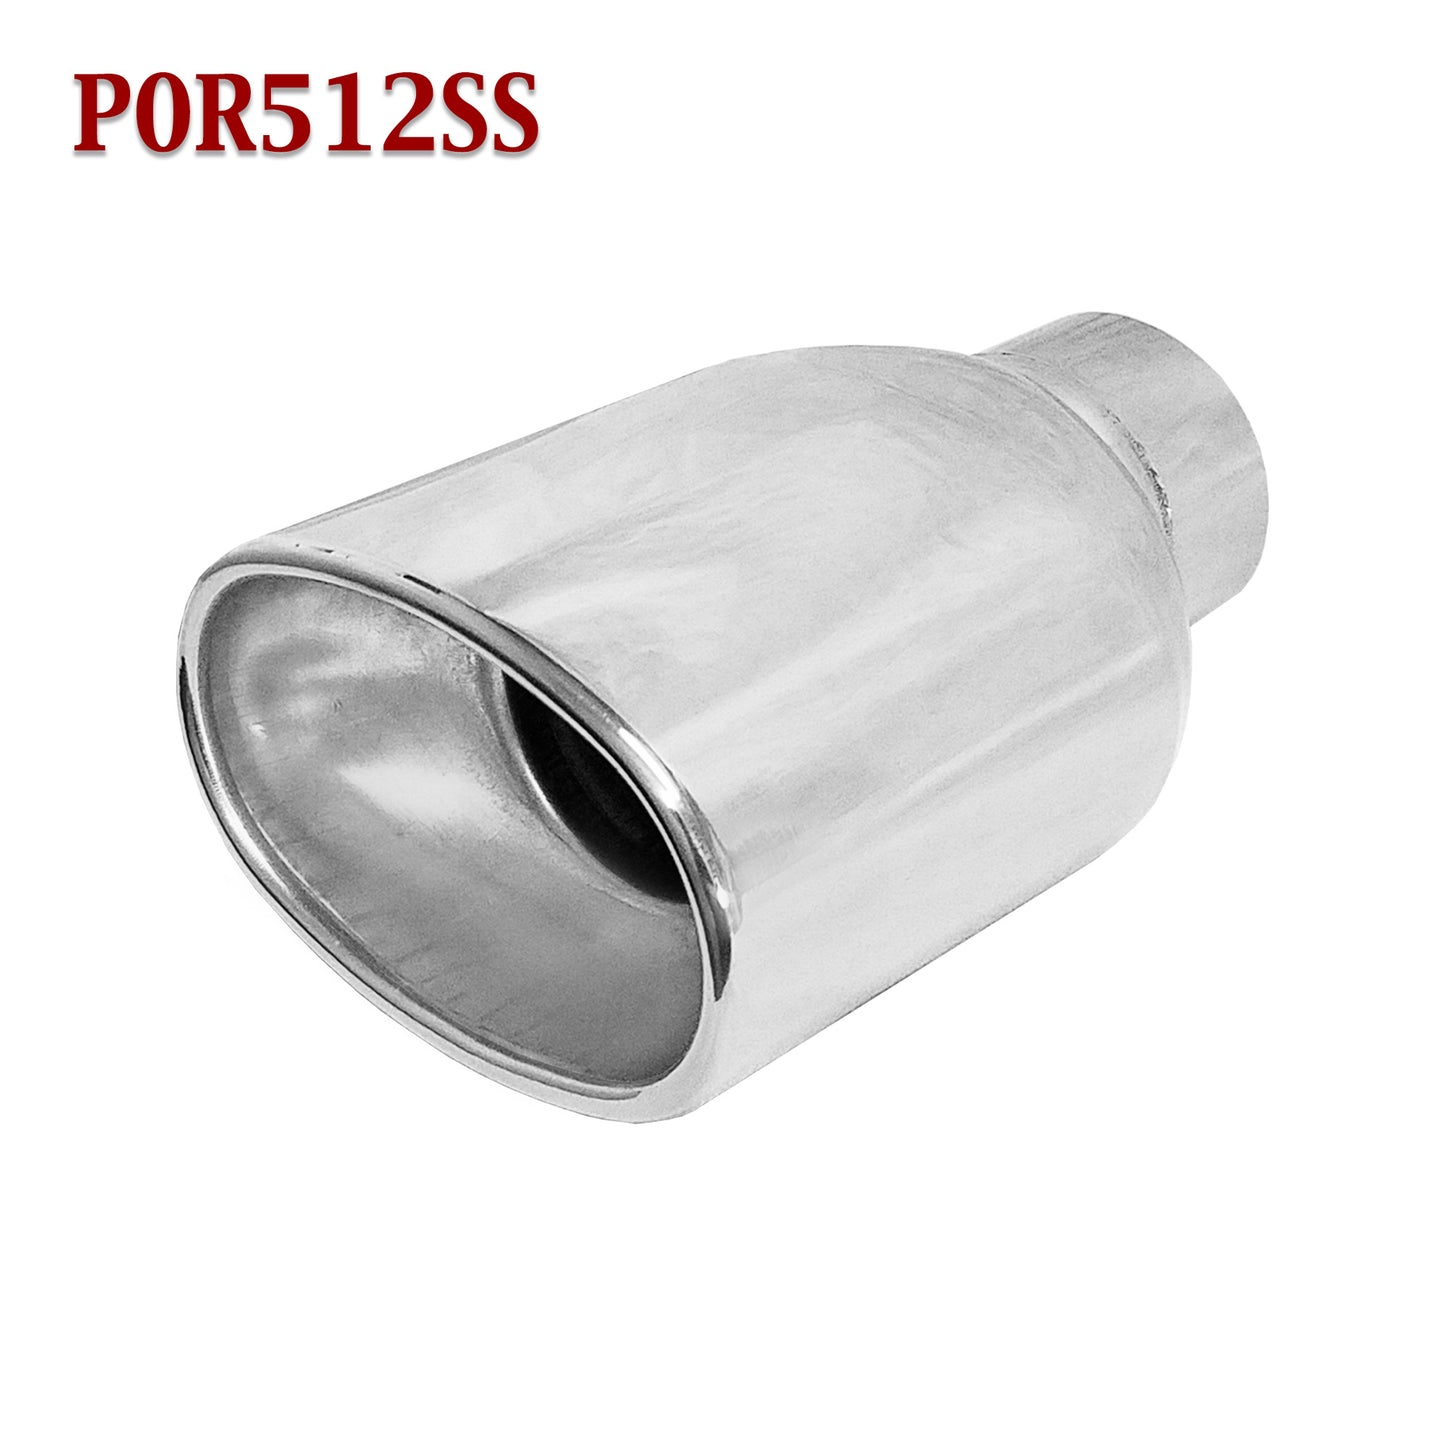 POR512SS 2.5" Stainless Oval Exhaust Tip 2 1/2" Inlet / 5 1/4" Outlet / 5" Long